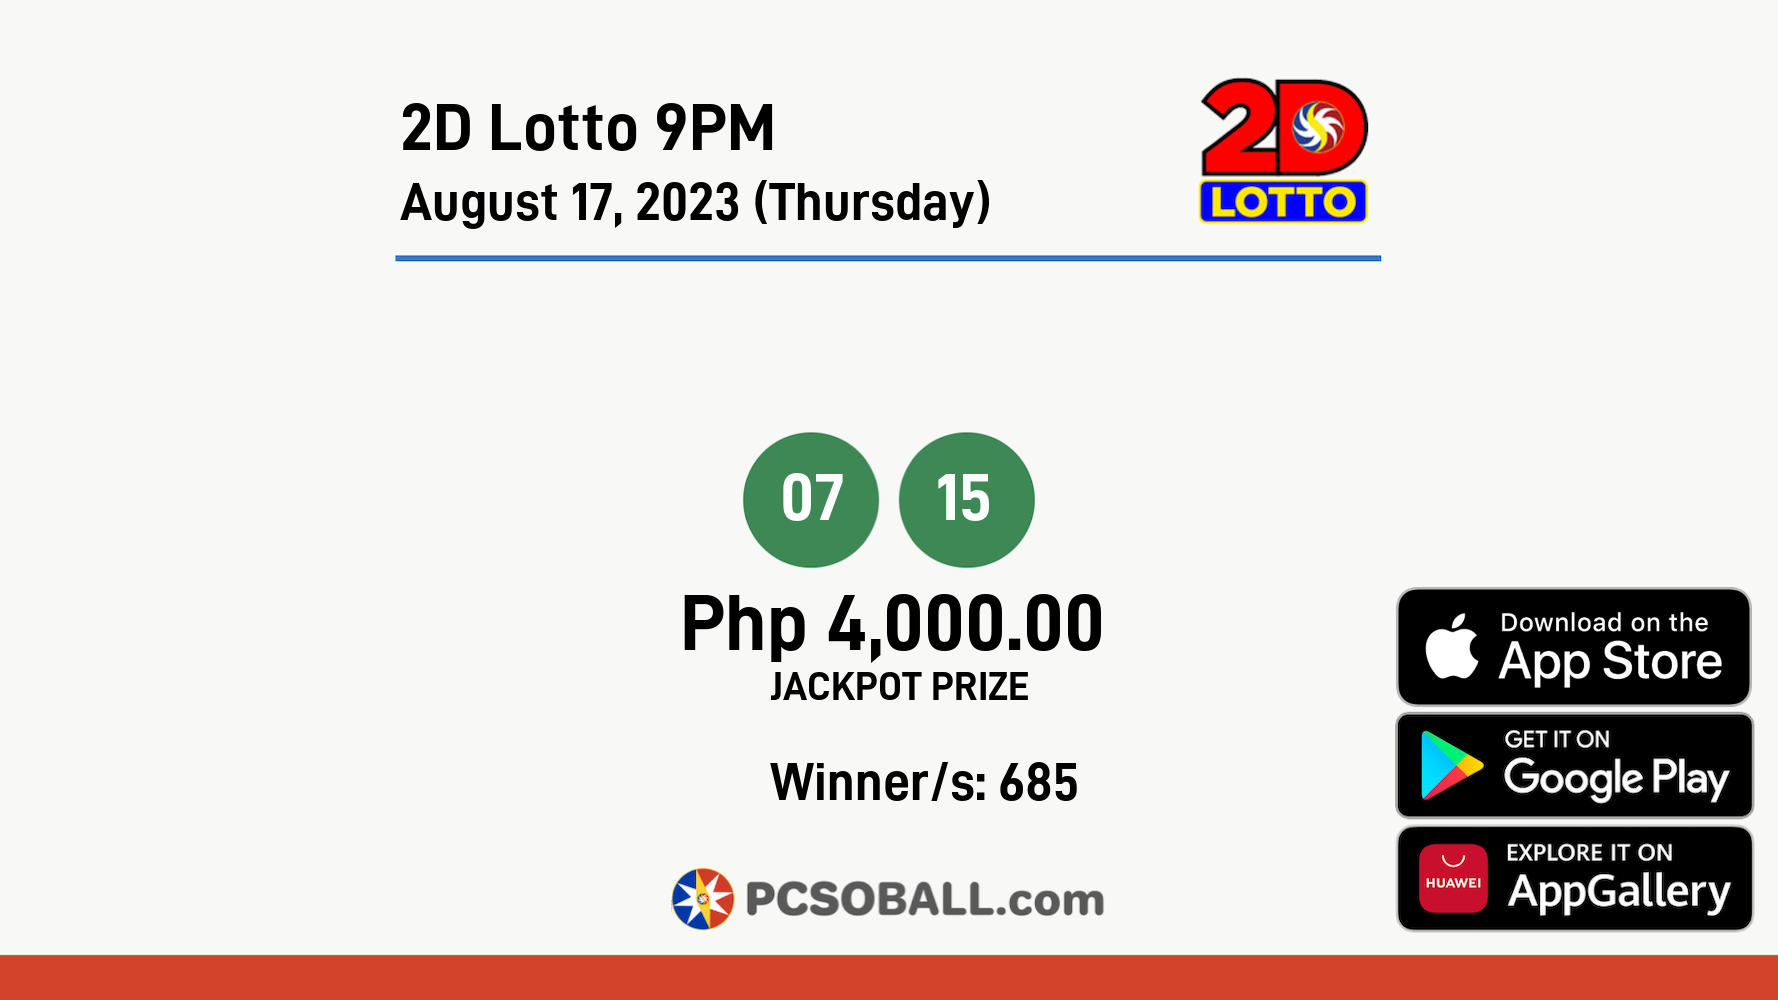 2D Lotto 9PM August 17, 2023 (Thursday) Result